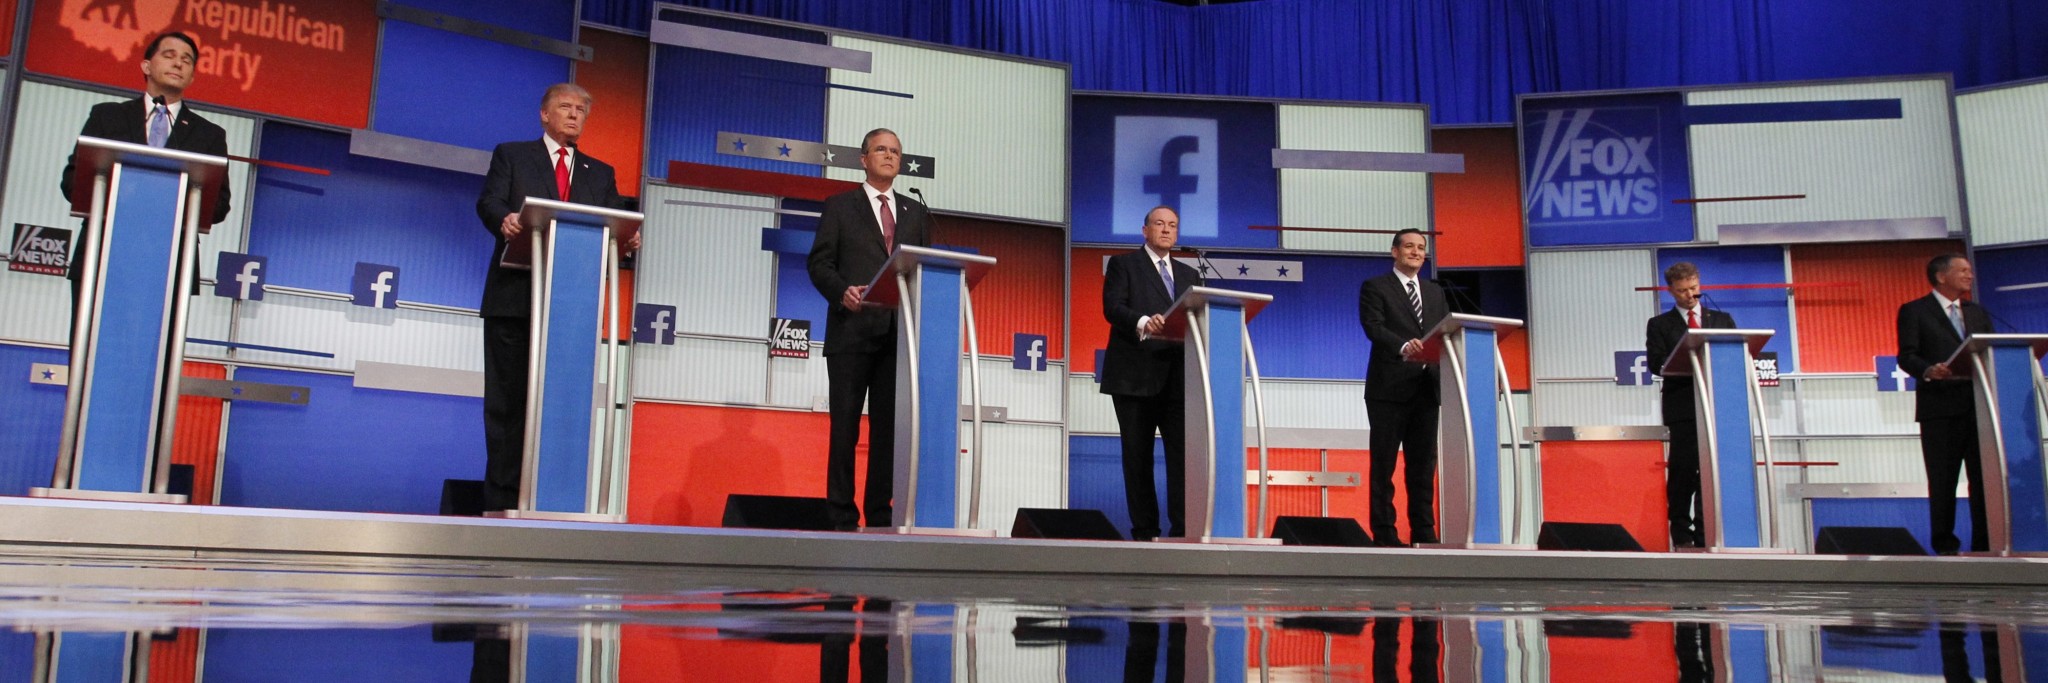 How to Watch The ABC Republican Debate on Roku, Fire TV, Apple TV, and More!